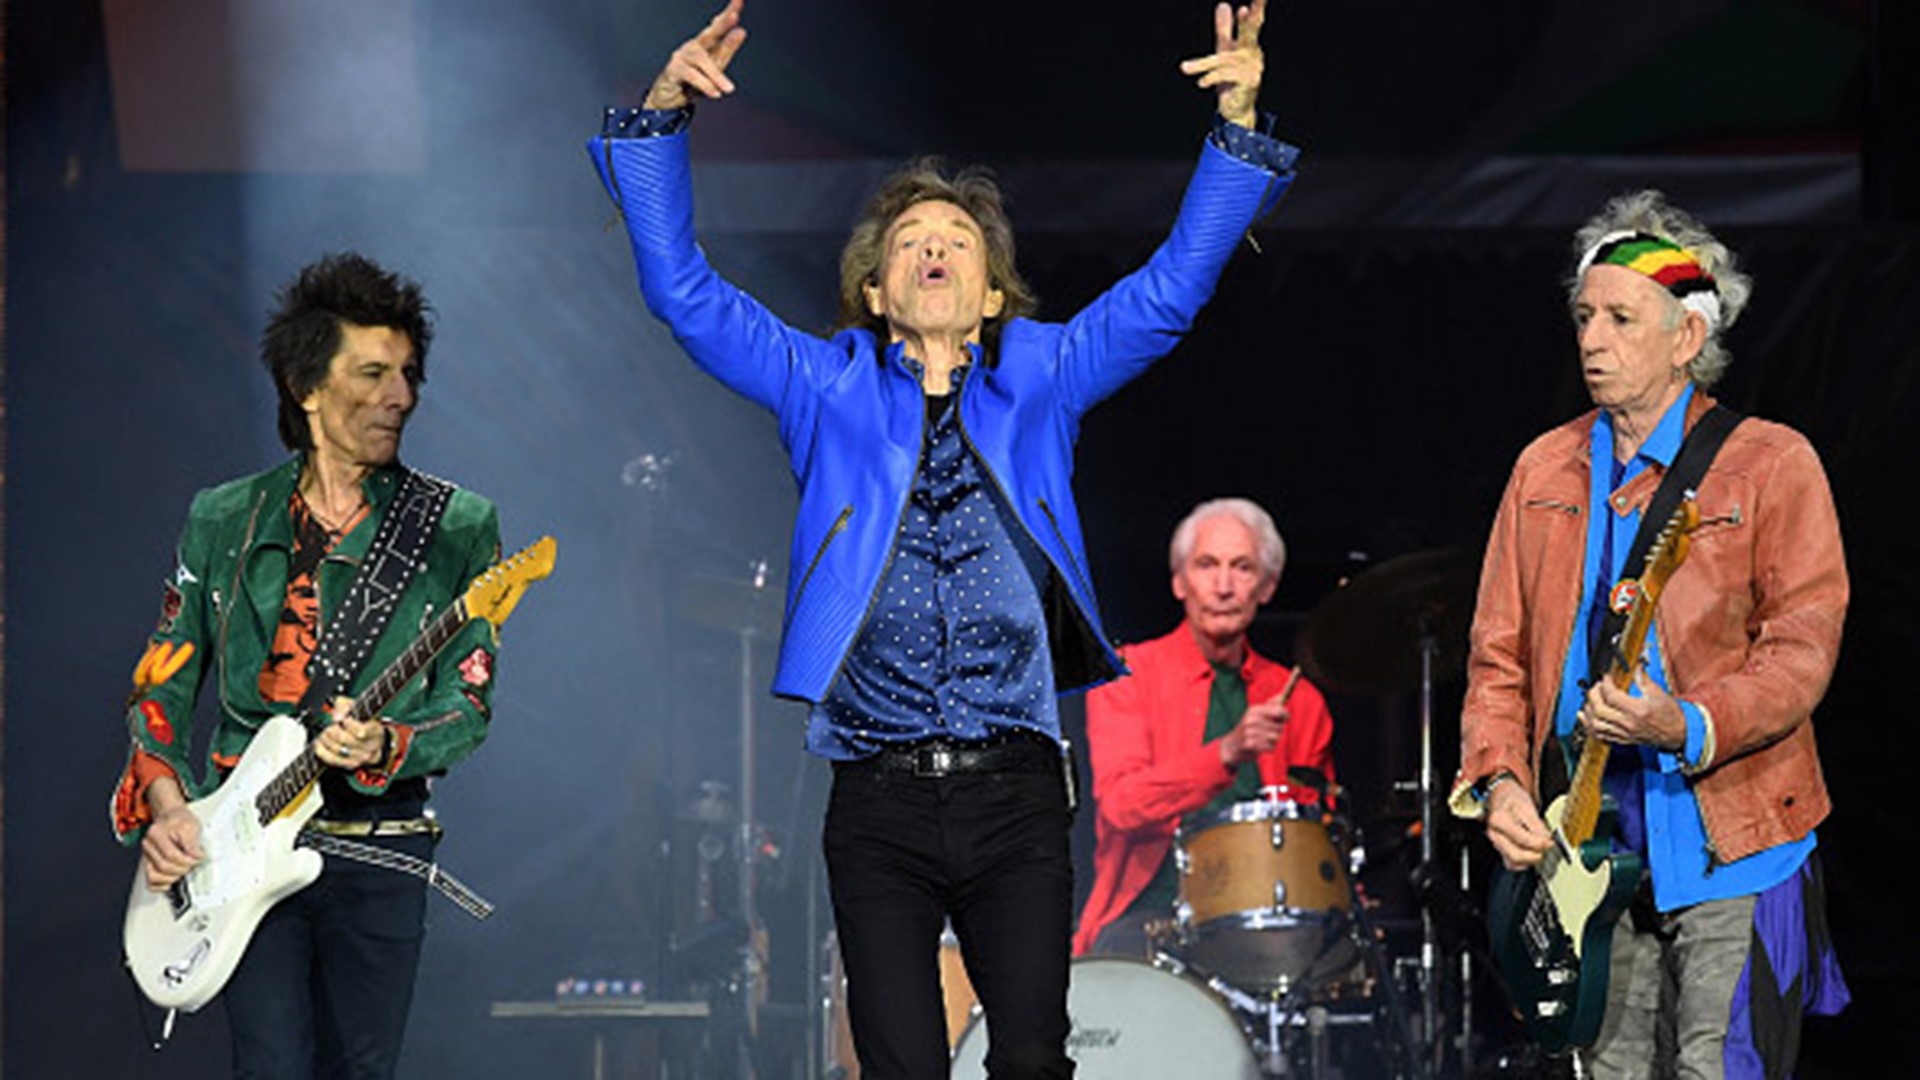 Jazz Fest will celebrate its 50th anniversary with rock legends The Rolling Stones, confirming one of the worst-kept secrets among festival-goers, and pop superstar Katy Perry.